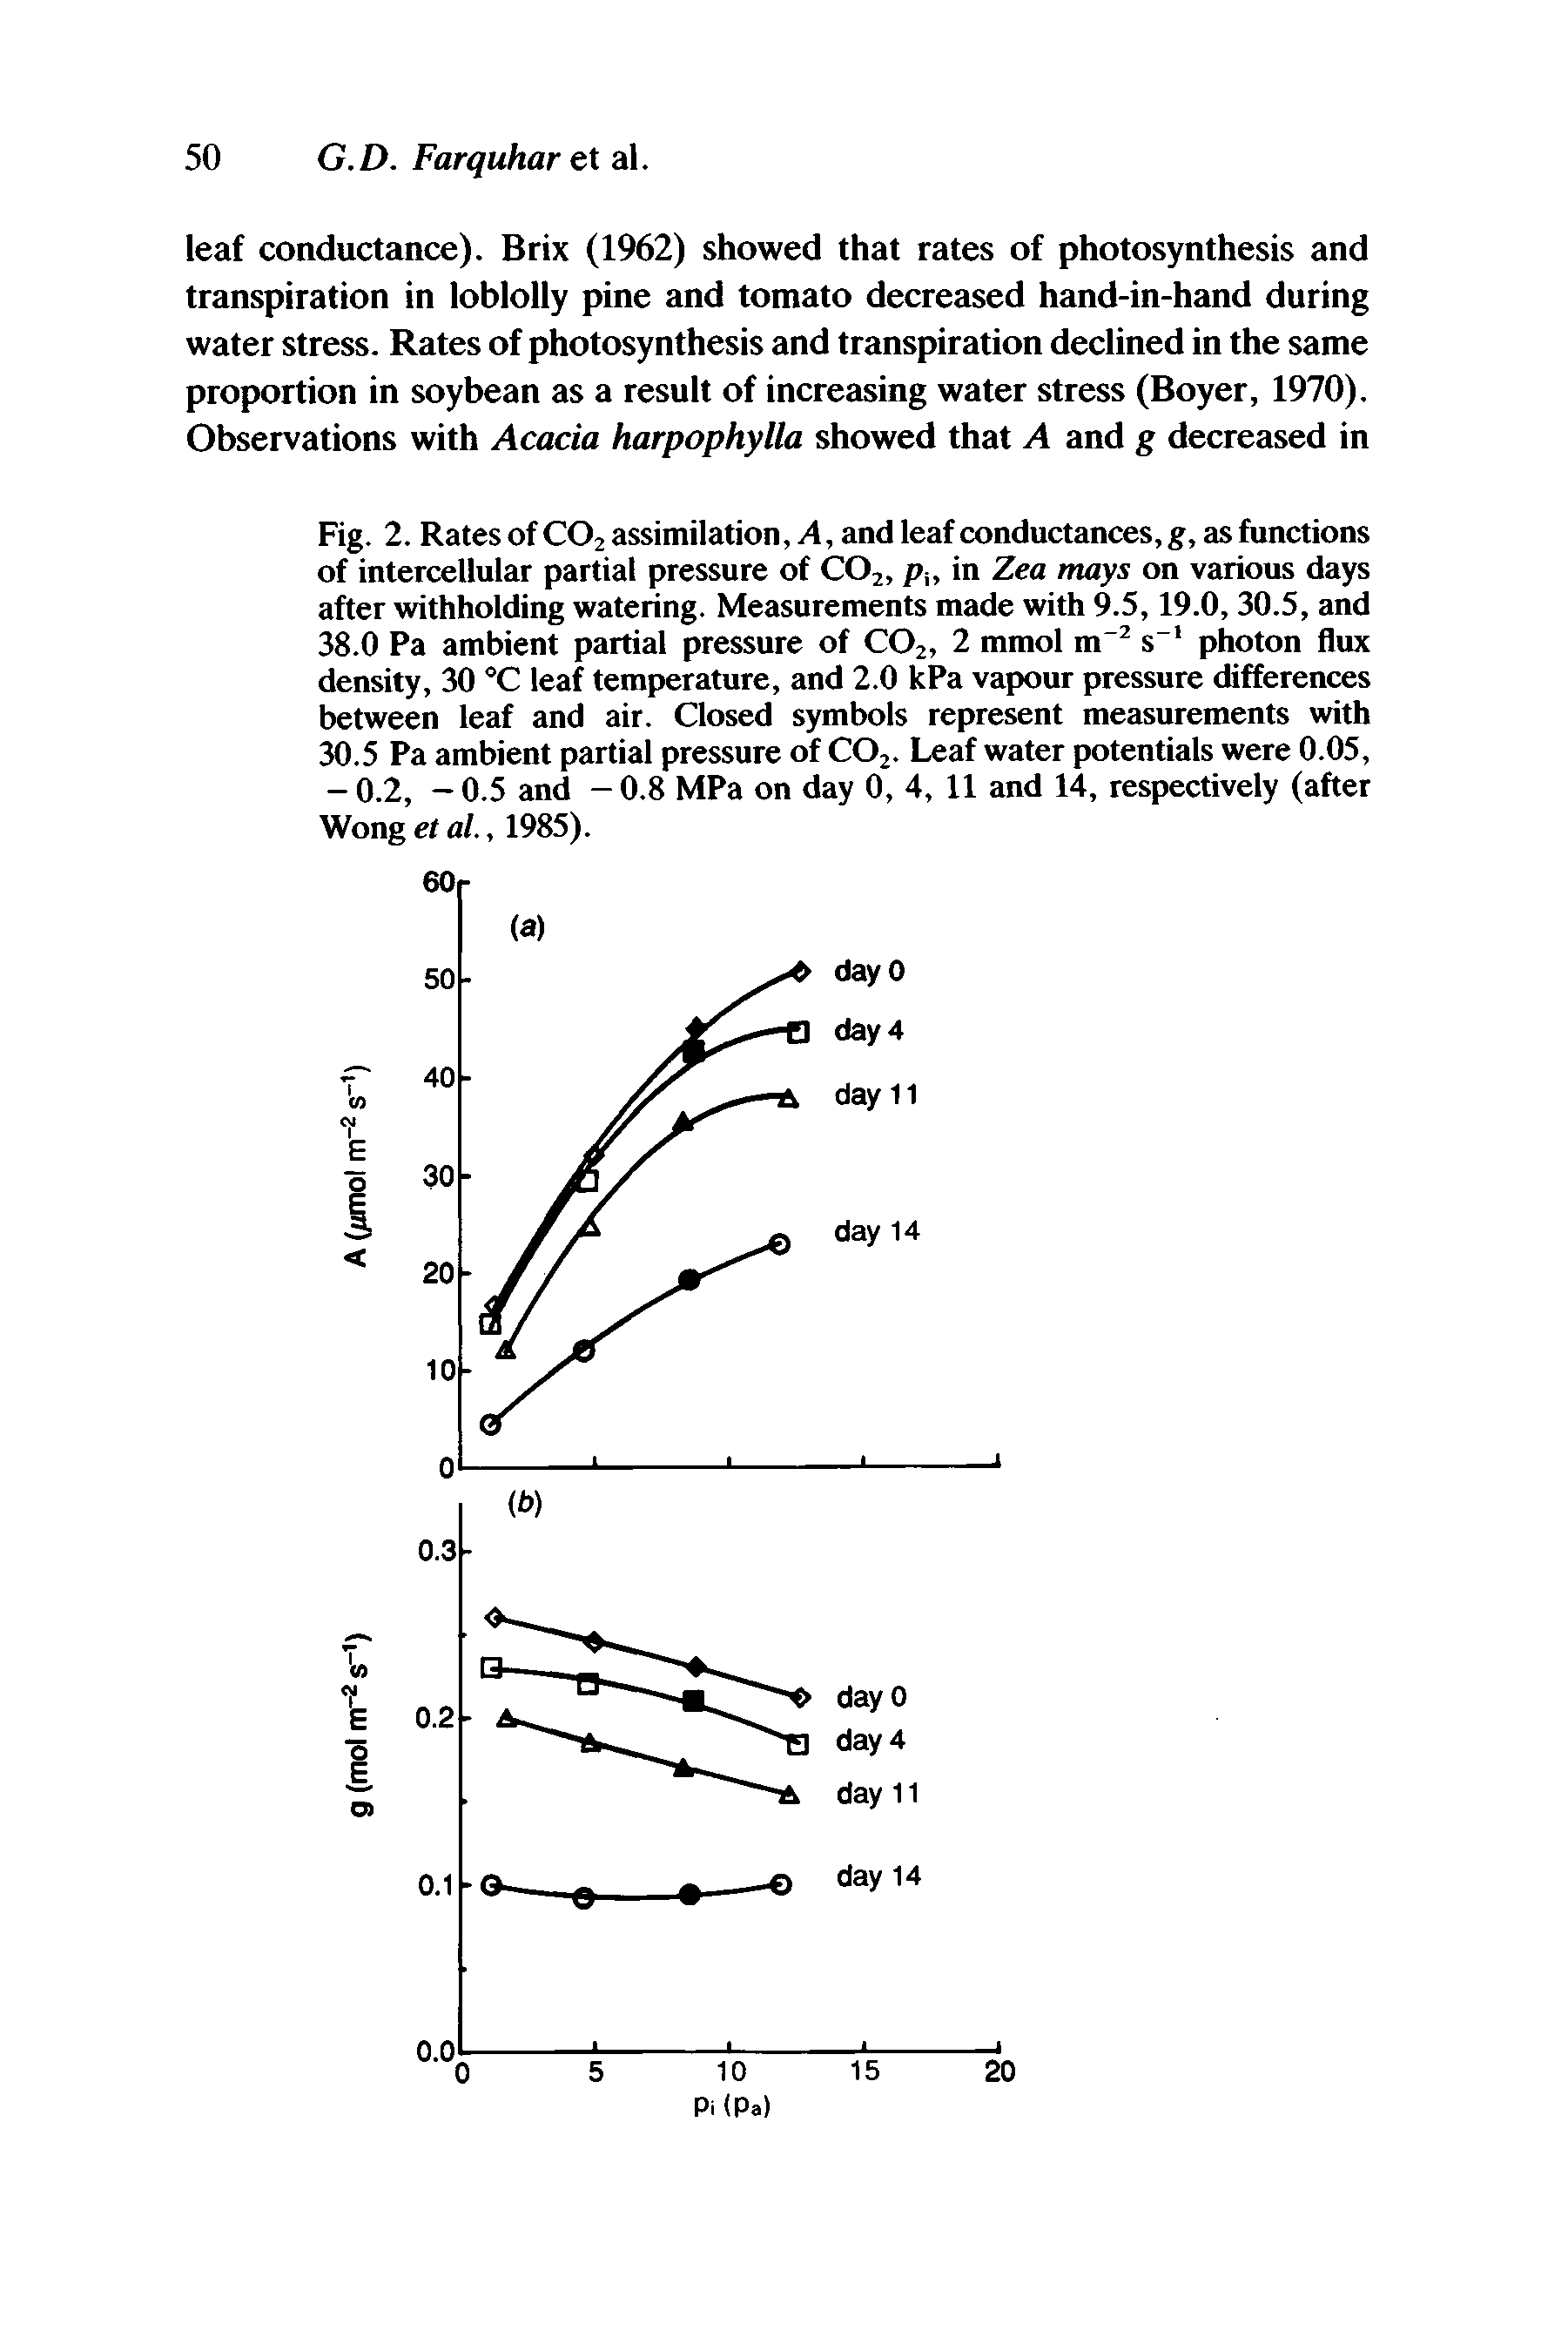 Fig. 2. Rates of CO2 assimilation,. 4, and leaf conductances, g, as functions of intercellular partial pressure of CO2, p in Zea mays on various days after withholding watering. Measurements made with 9.5,19.0,30.5, and 38.0 Pa ambient partial pressure of CO2, 2 mmol m" s" photon flux density, 30 °C leaf temperature, and 2.0 kPa vapour pressure differences between leaf and air. Closed symbols represent measurements with 30.5 Pa ambient partial pressure of COj. Leaf water potentials were 0.05, - 0.2, - 0.5 and - 0.8 MPa on day 0, 4, 11 and 14, respectively (after Wong et al., 1985).